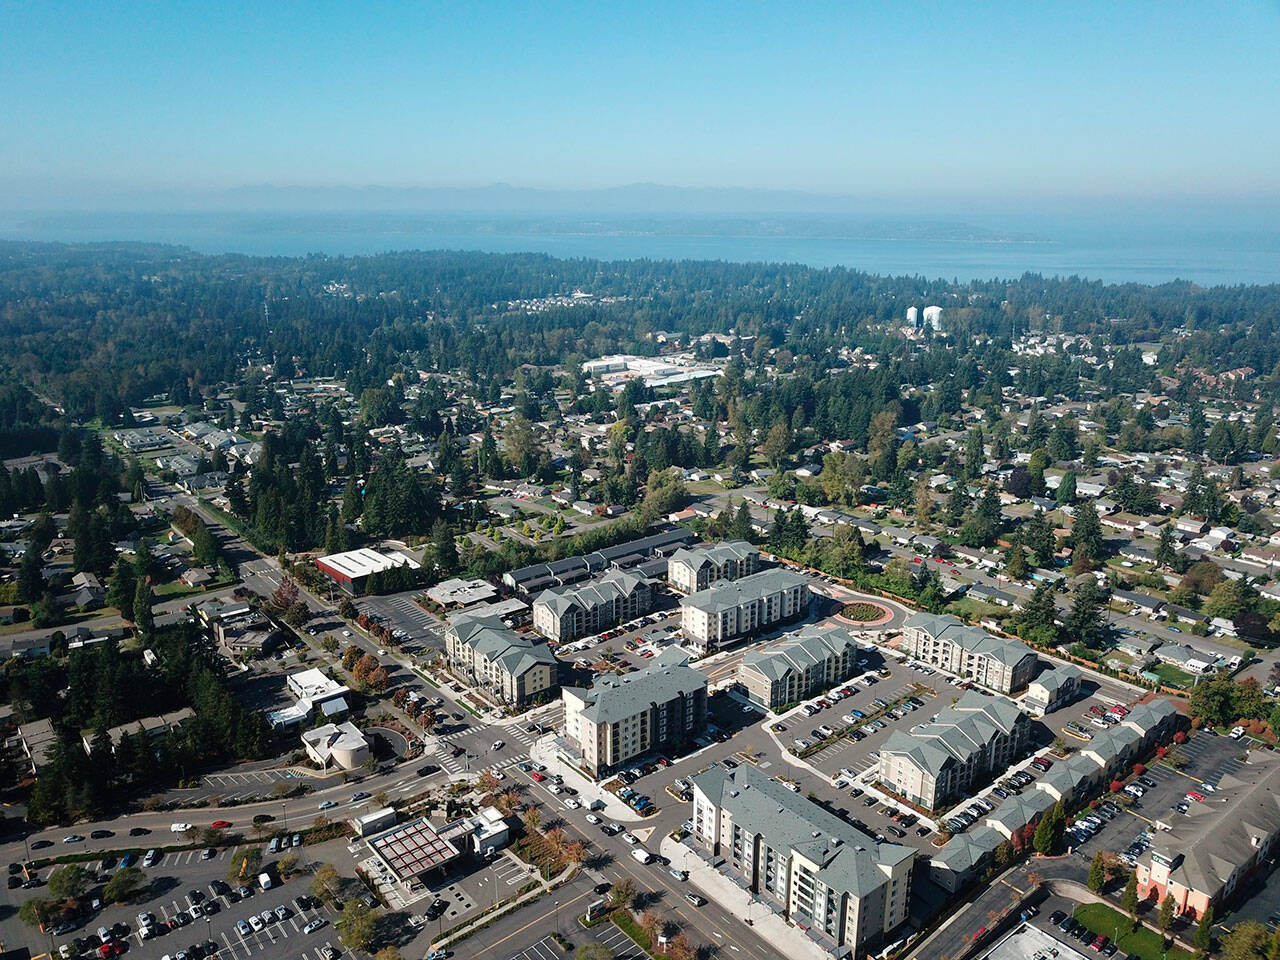 Photo courtesy of Bruce Honda
Bird’s eye view of apartments and single-family homes in downtown Federal Way.